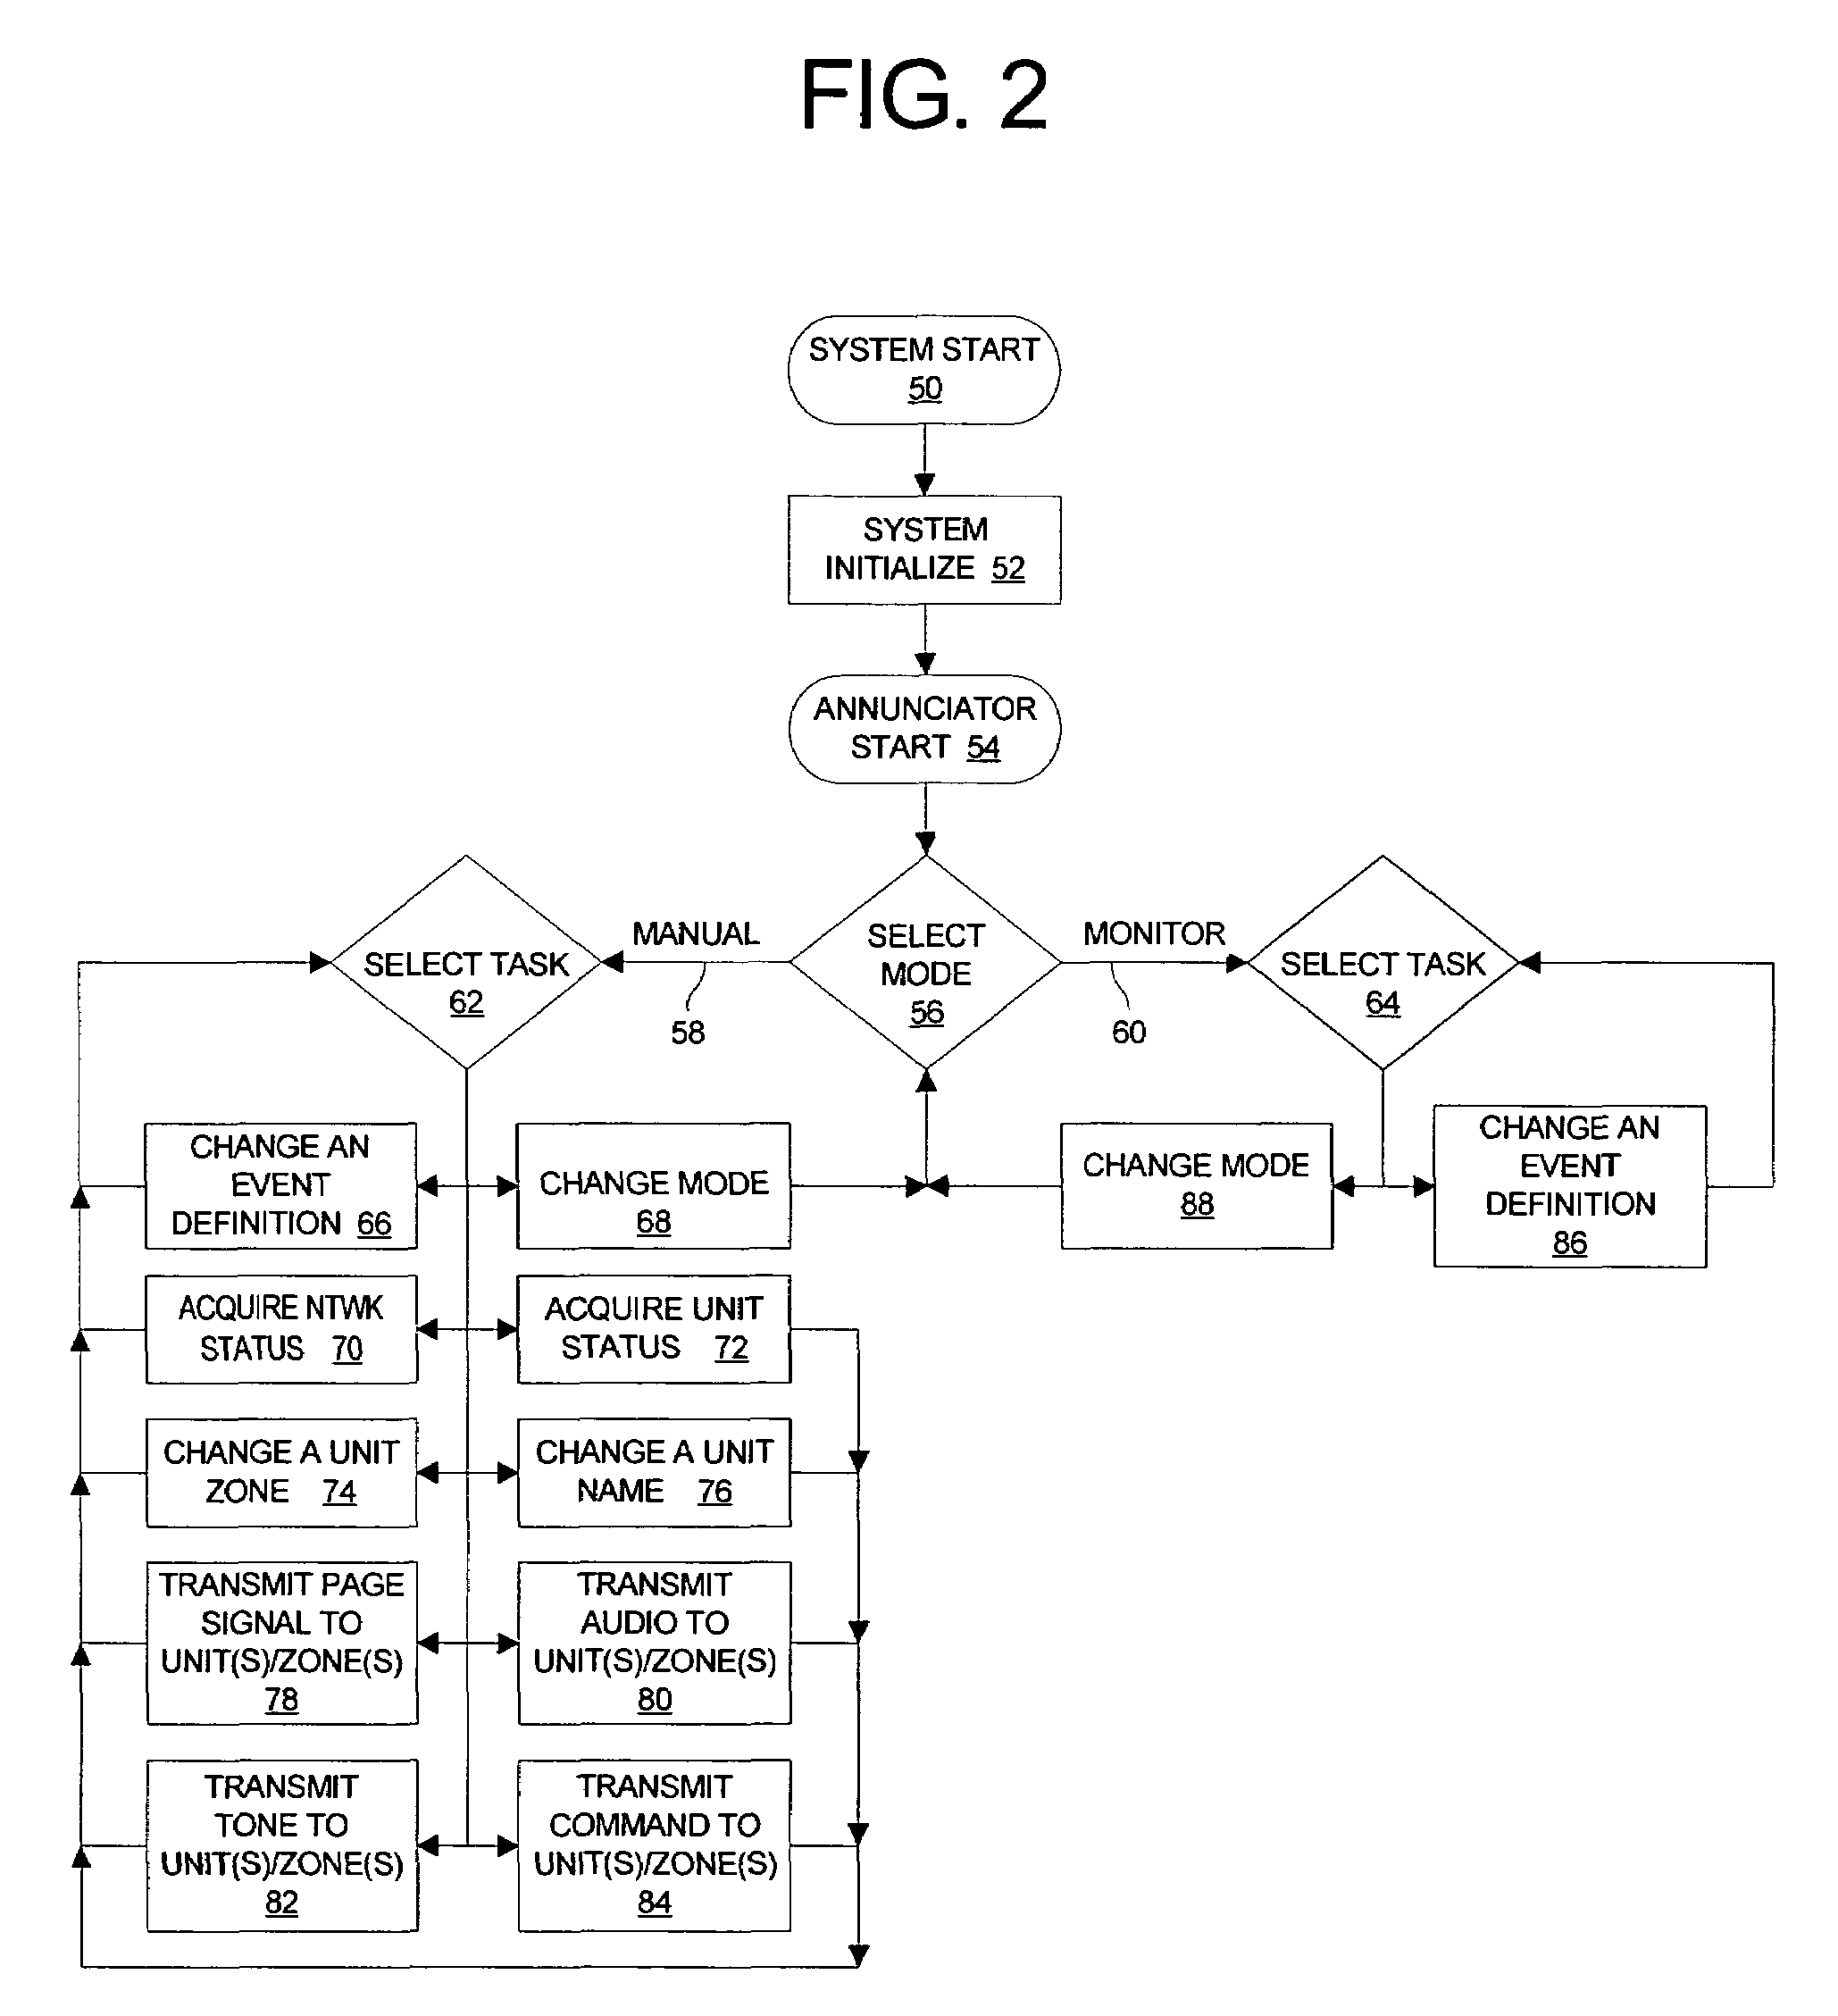 Programmable event driver/interface apparatus and method